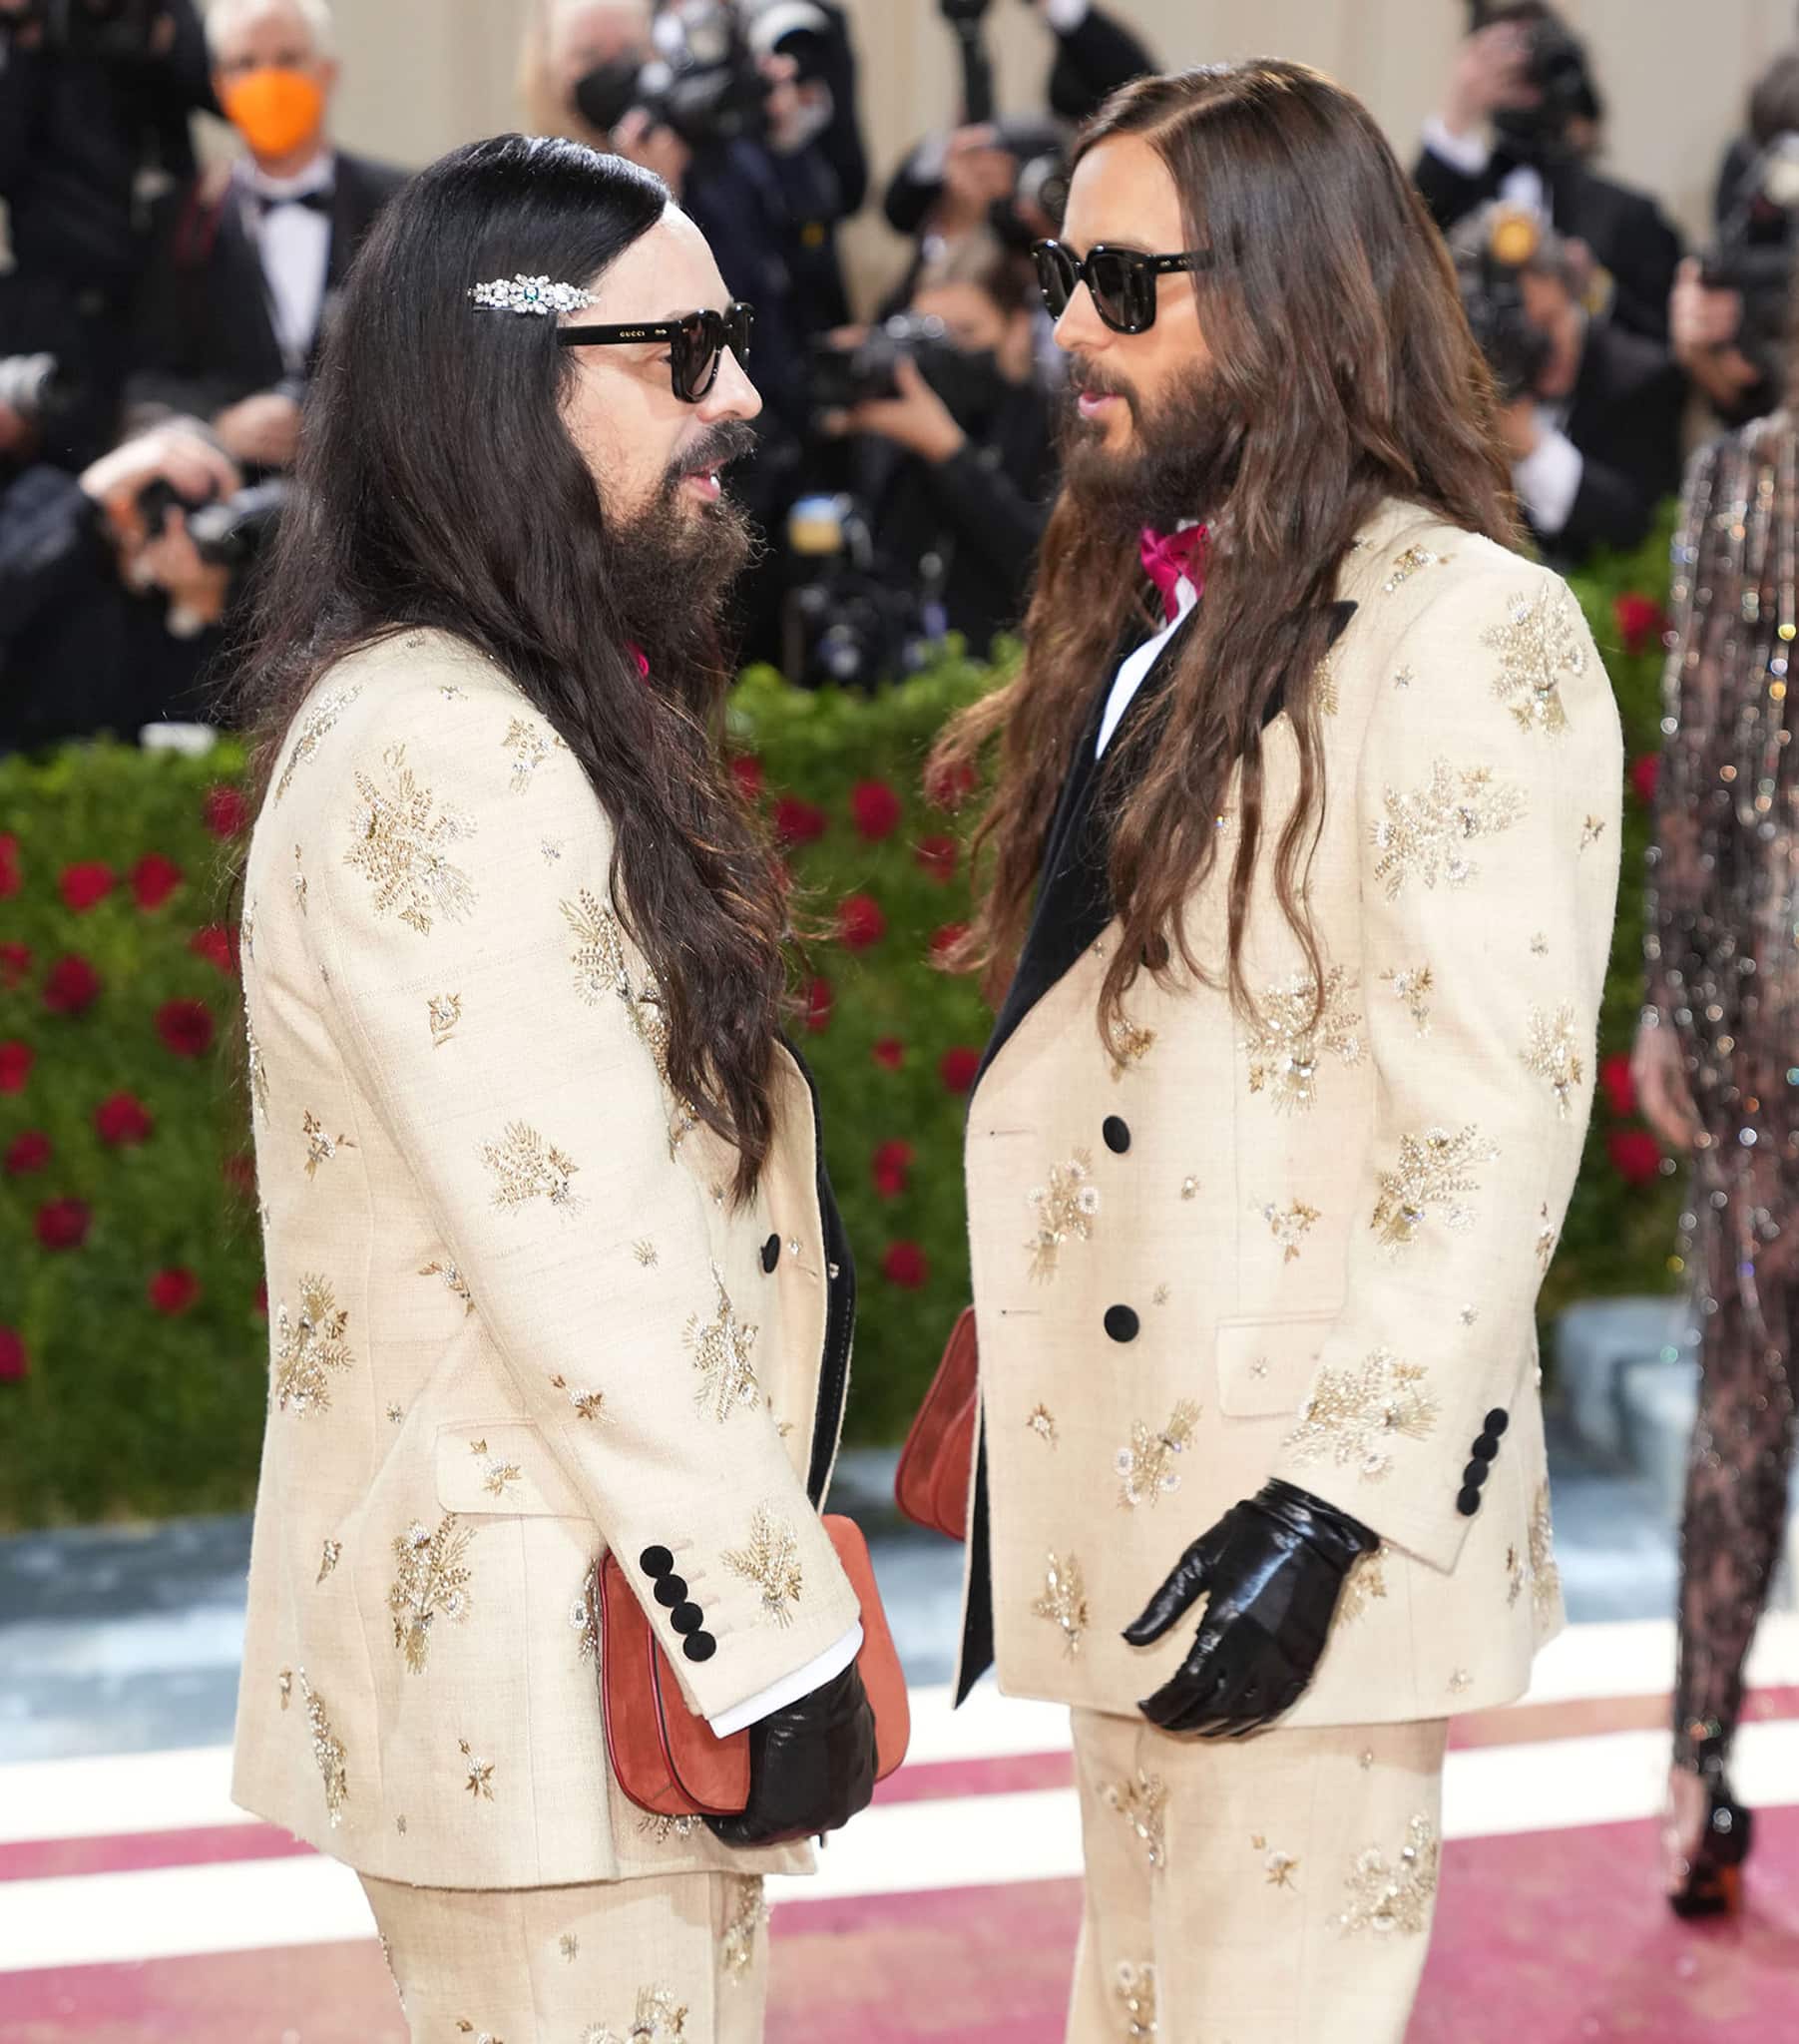 Alessandro Michele and Jared Leto complete their matching outfit with red bow ties, Gucci clutches, and black leather gloves